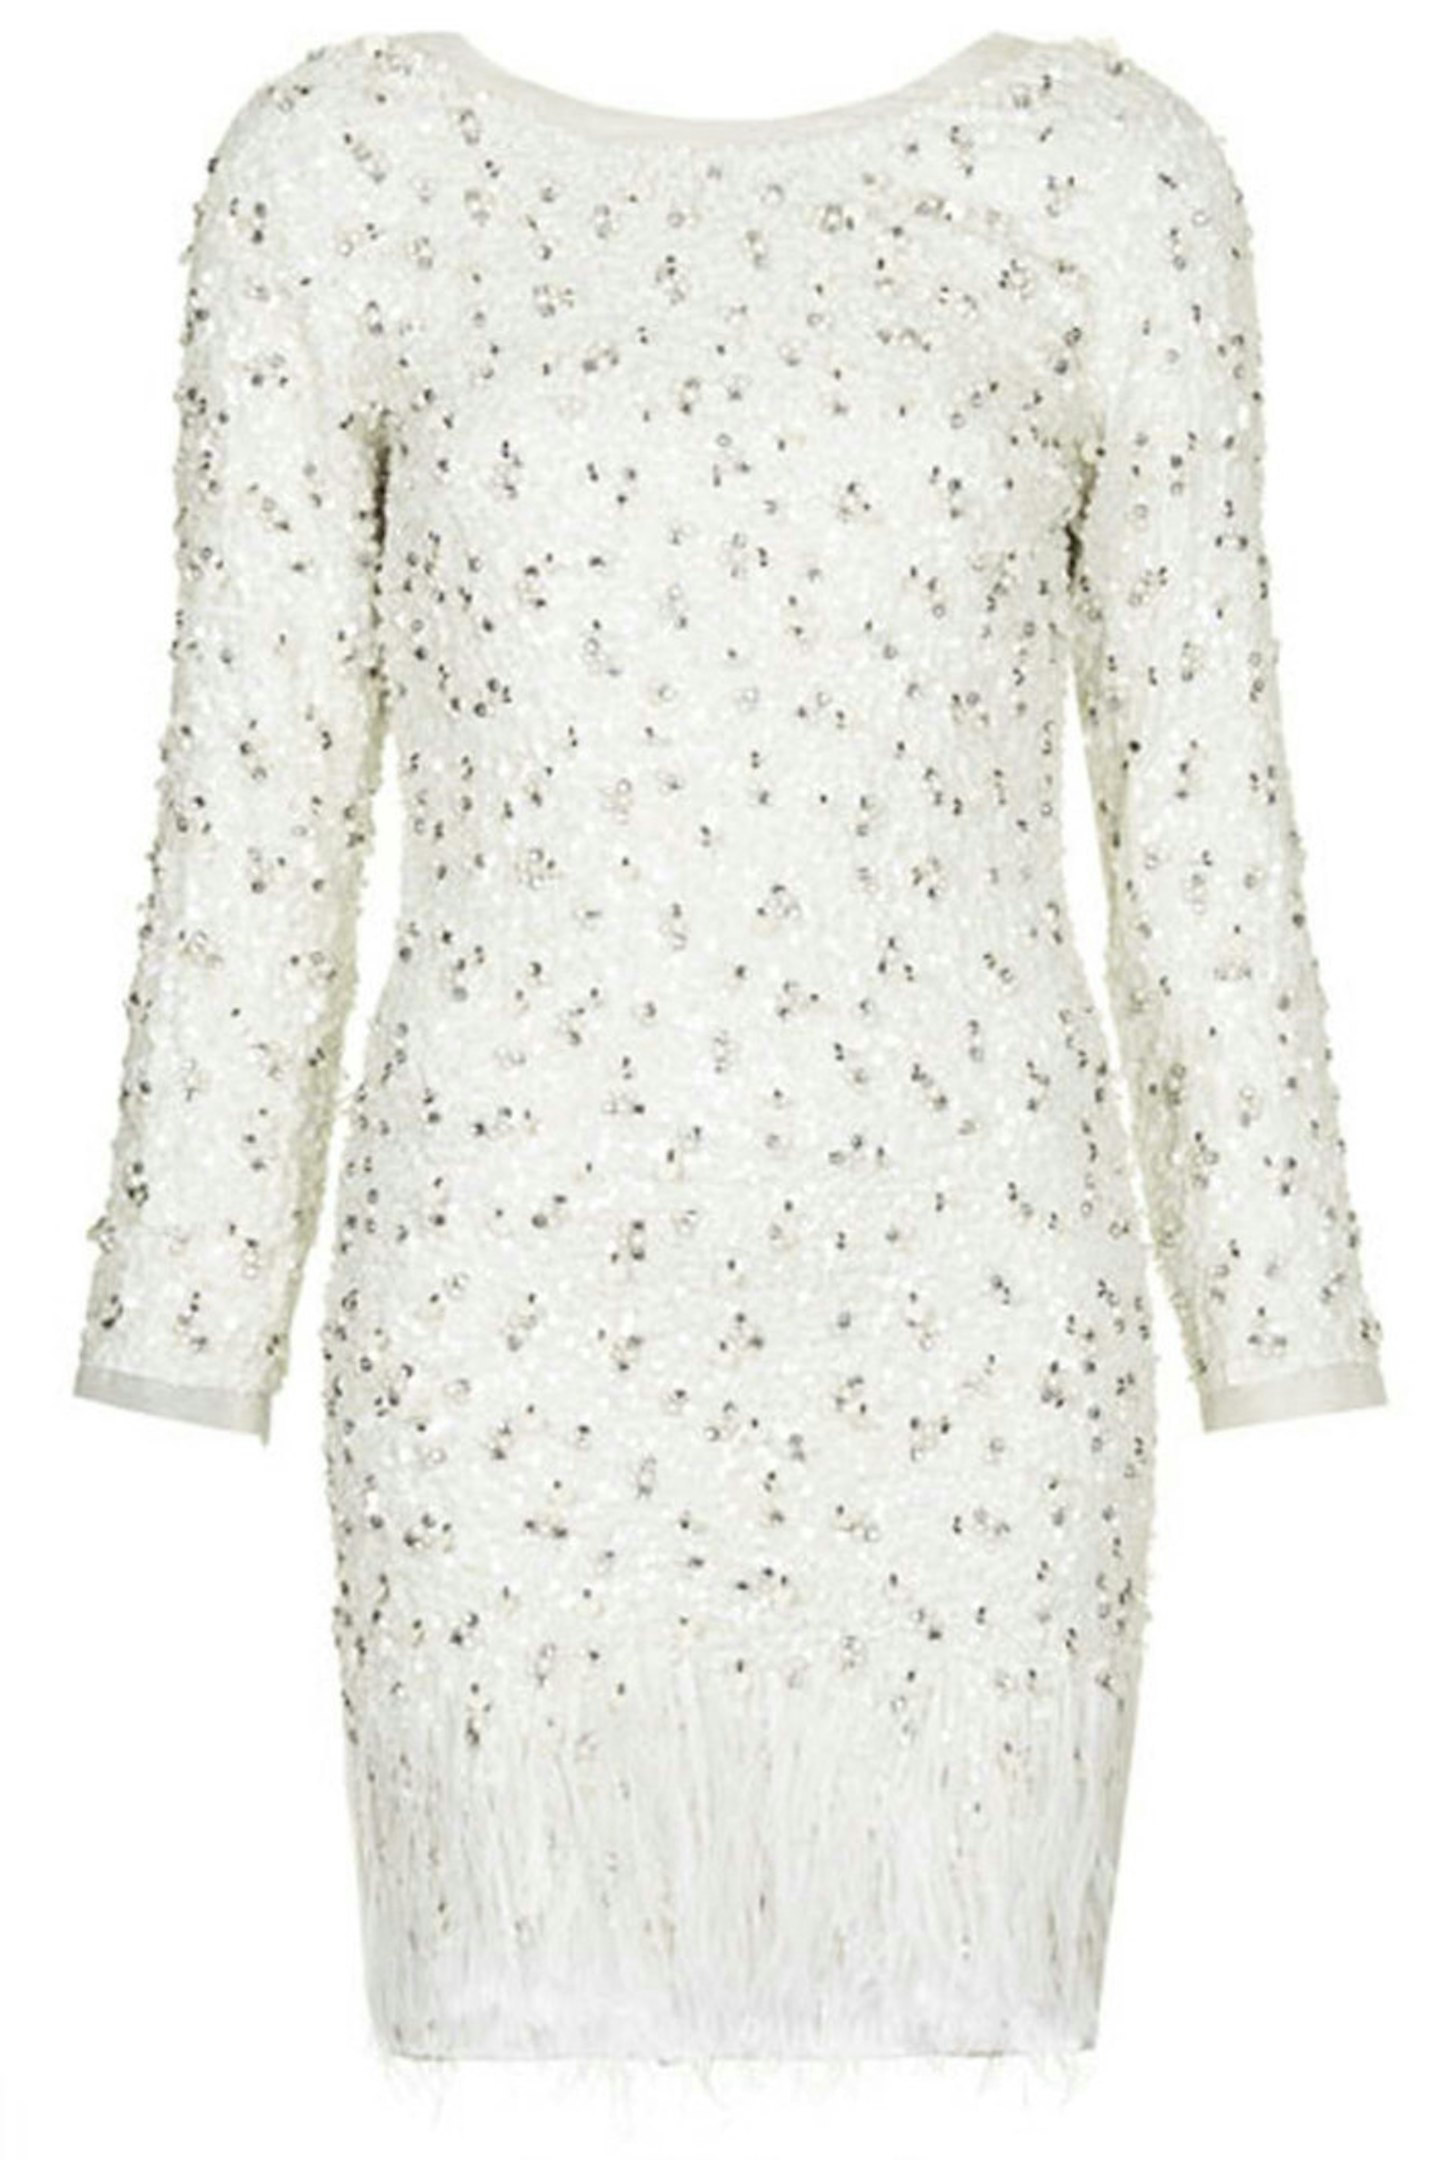 Limited Edition Embellished feather hem bodycon dress, £250, Topshop